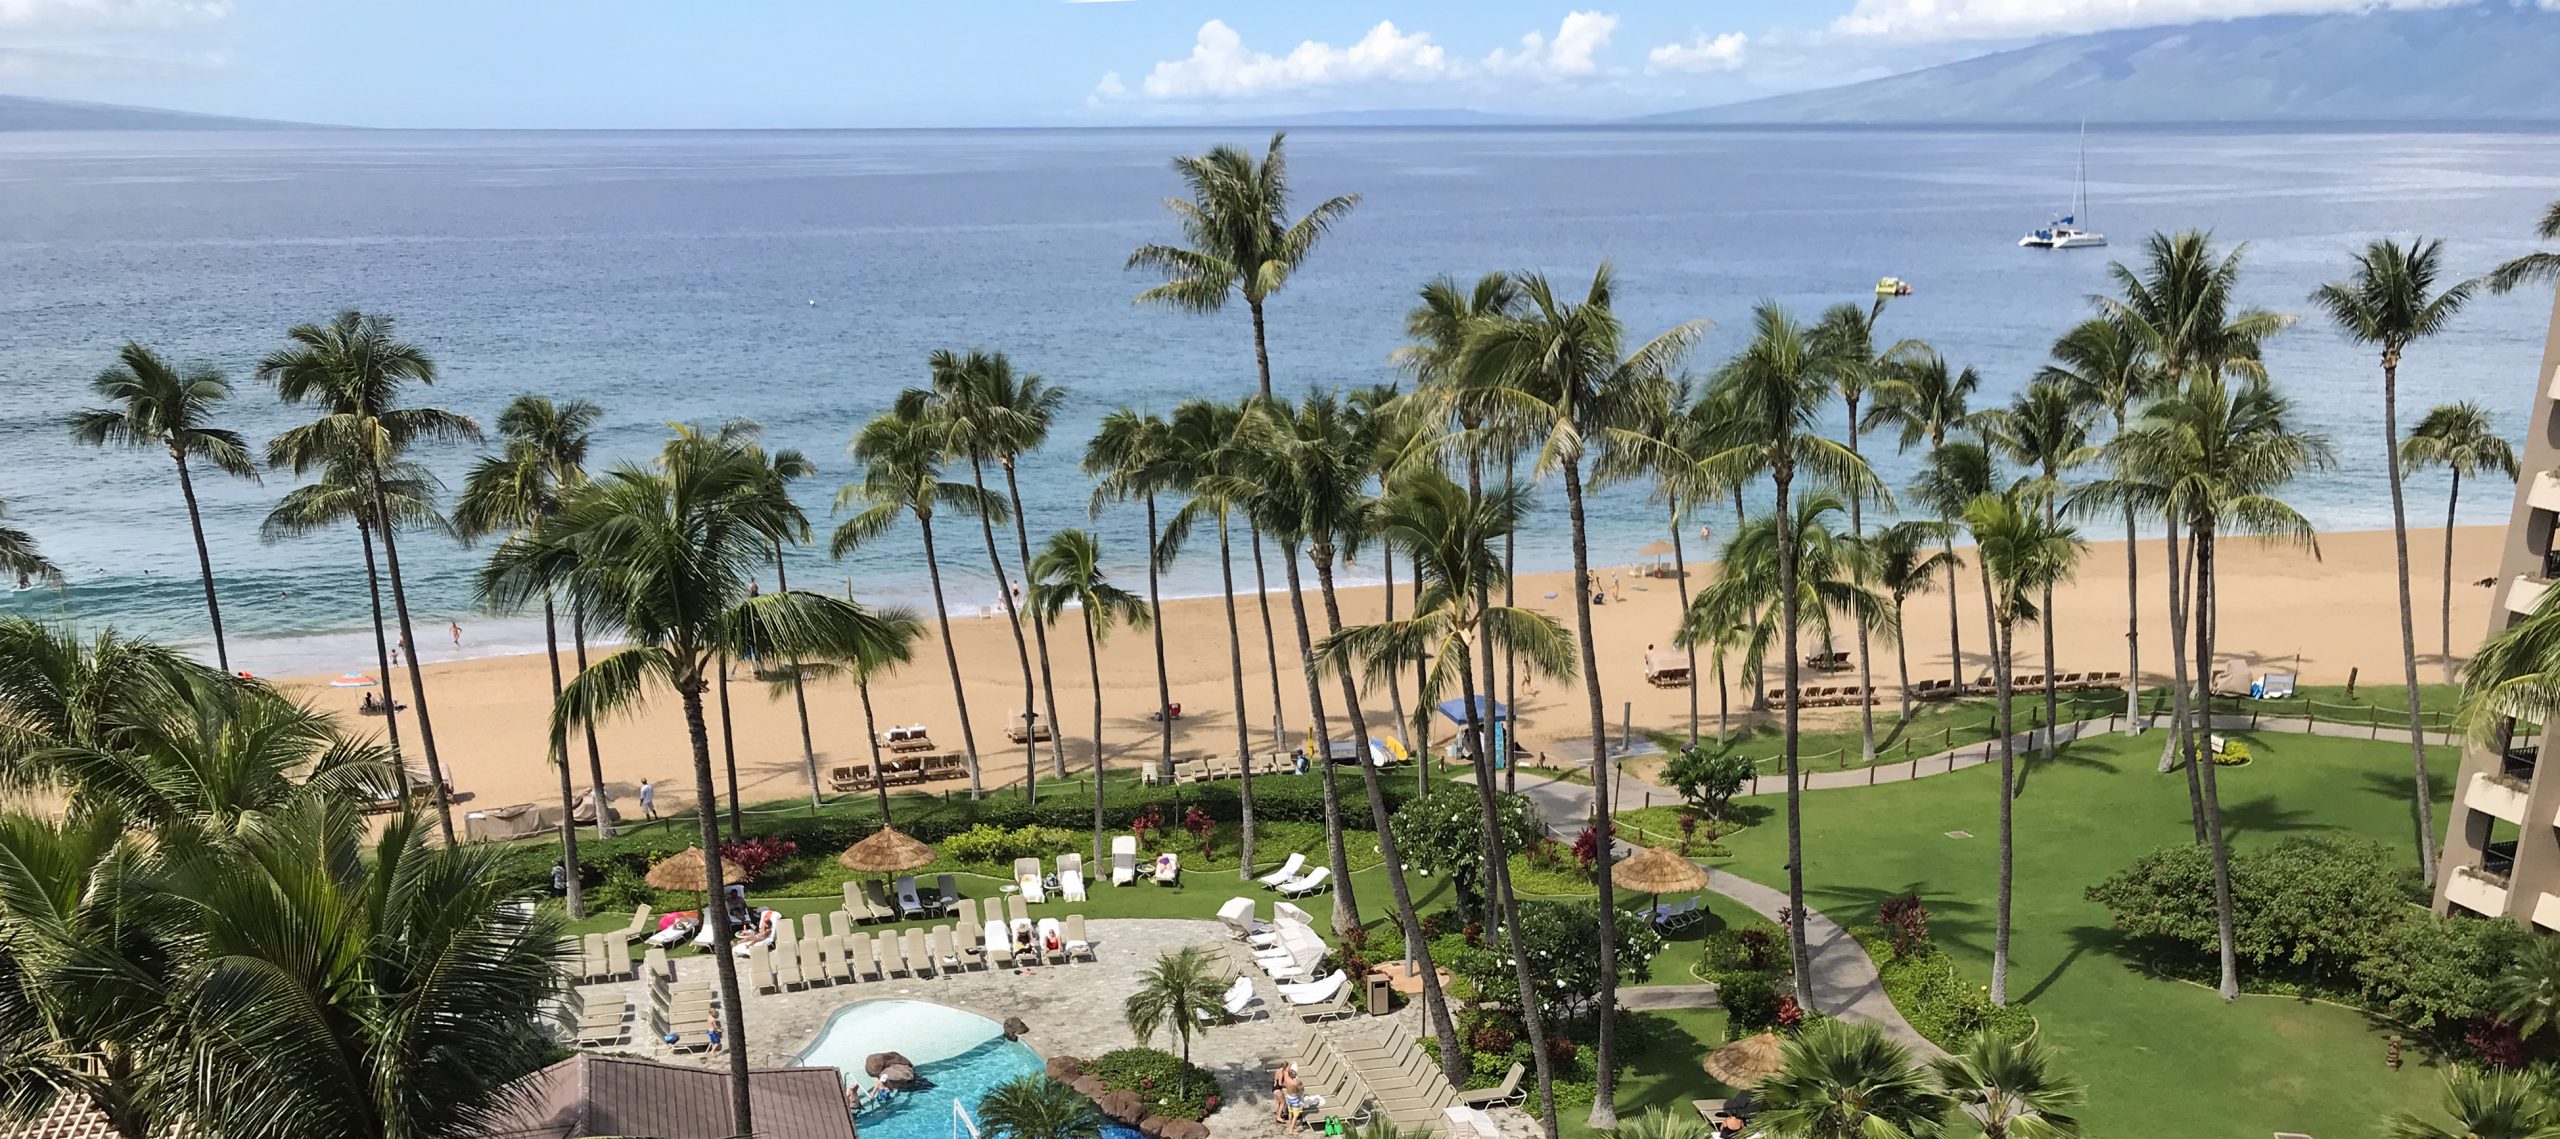 An image of Kaanapali Beach in Maui, Hawaii. - Travel more and pay less